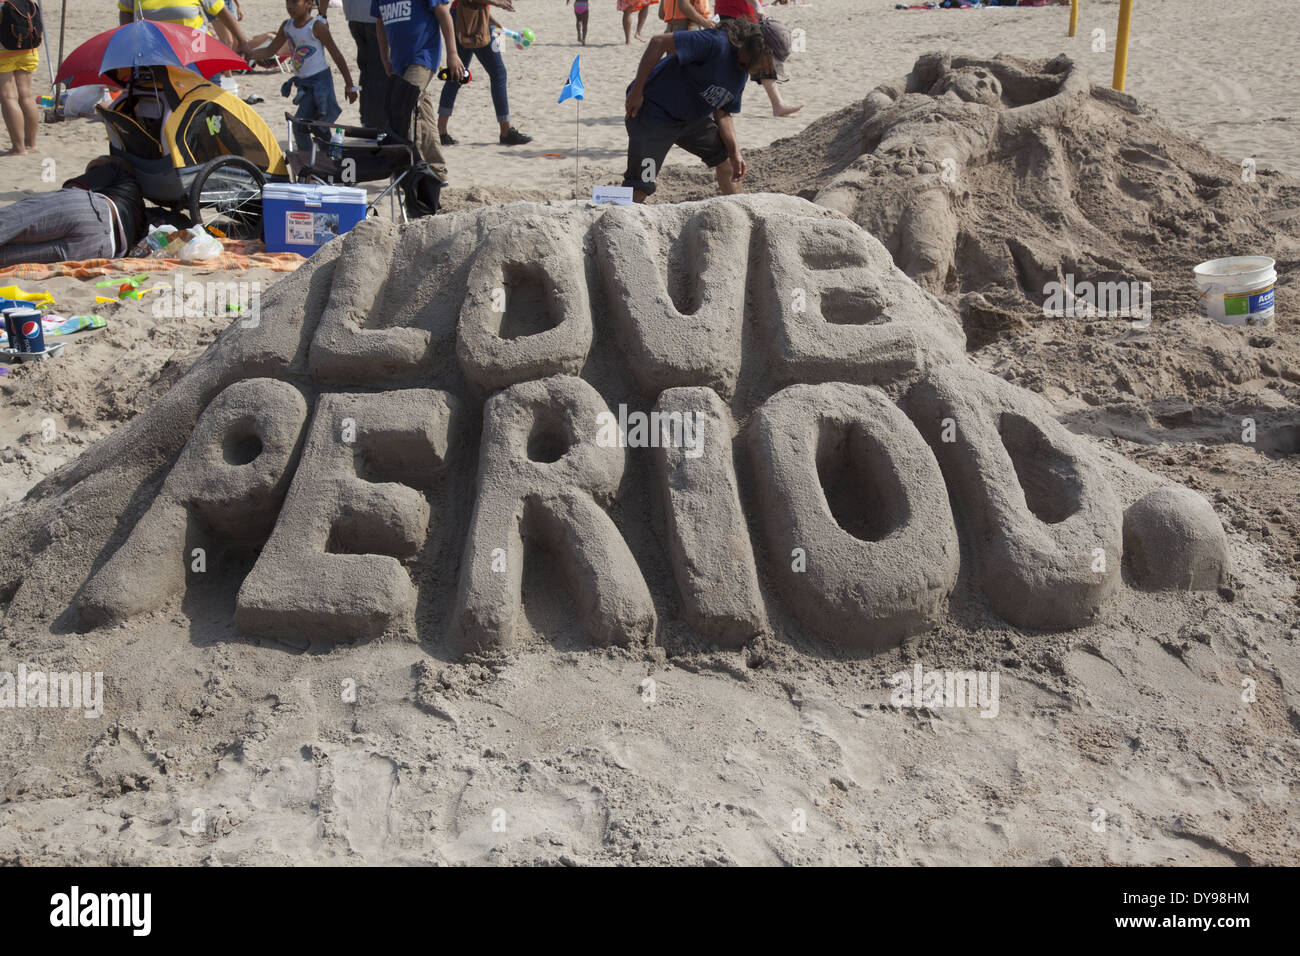 Annual Sand Castle building contest at the beach at Coney Island, Brooklyn, NY. Stock Photo